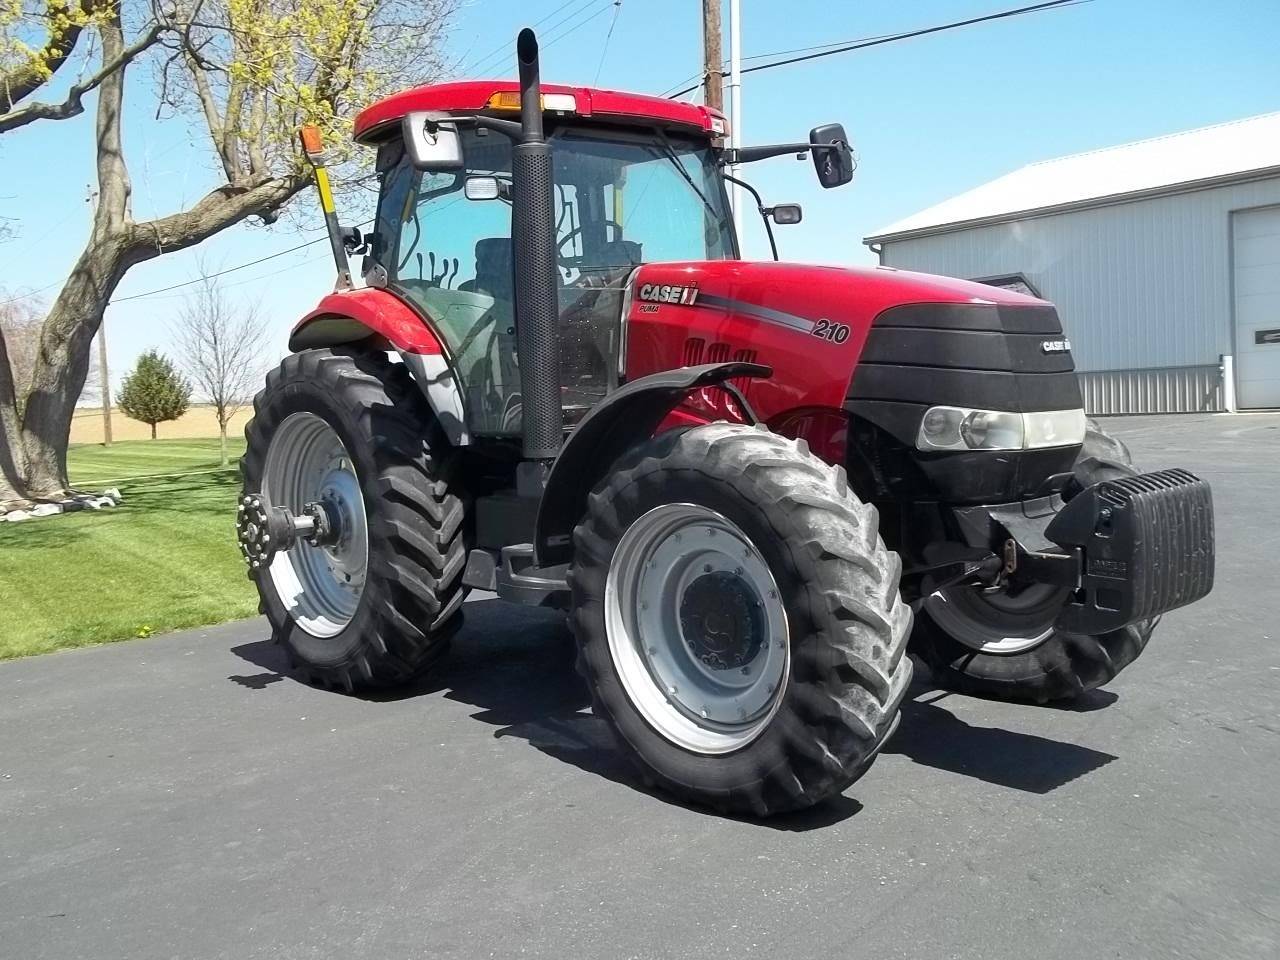 Case ih puma 225 specification • dimensions ••• agrister